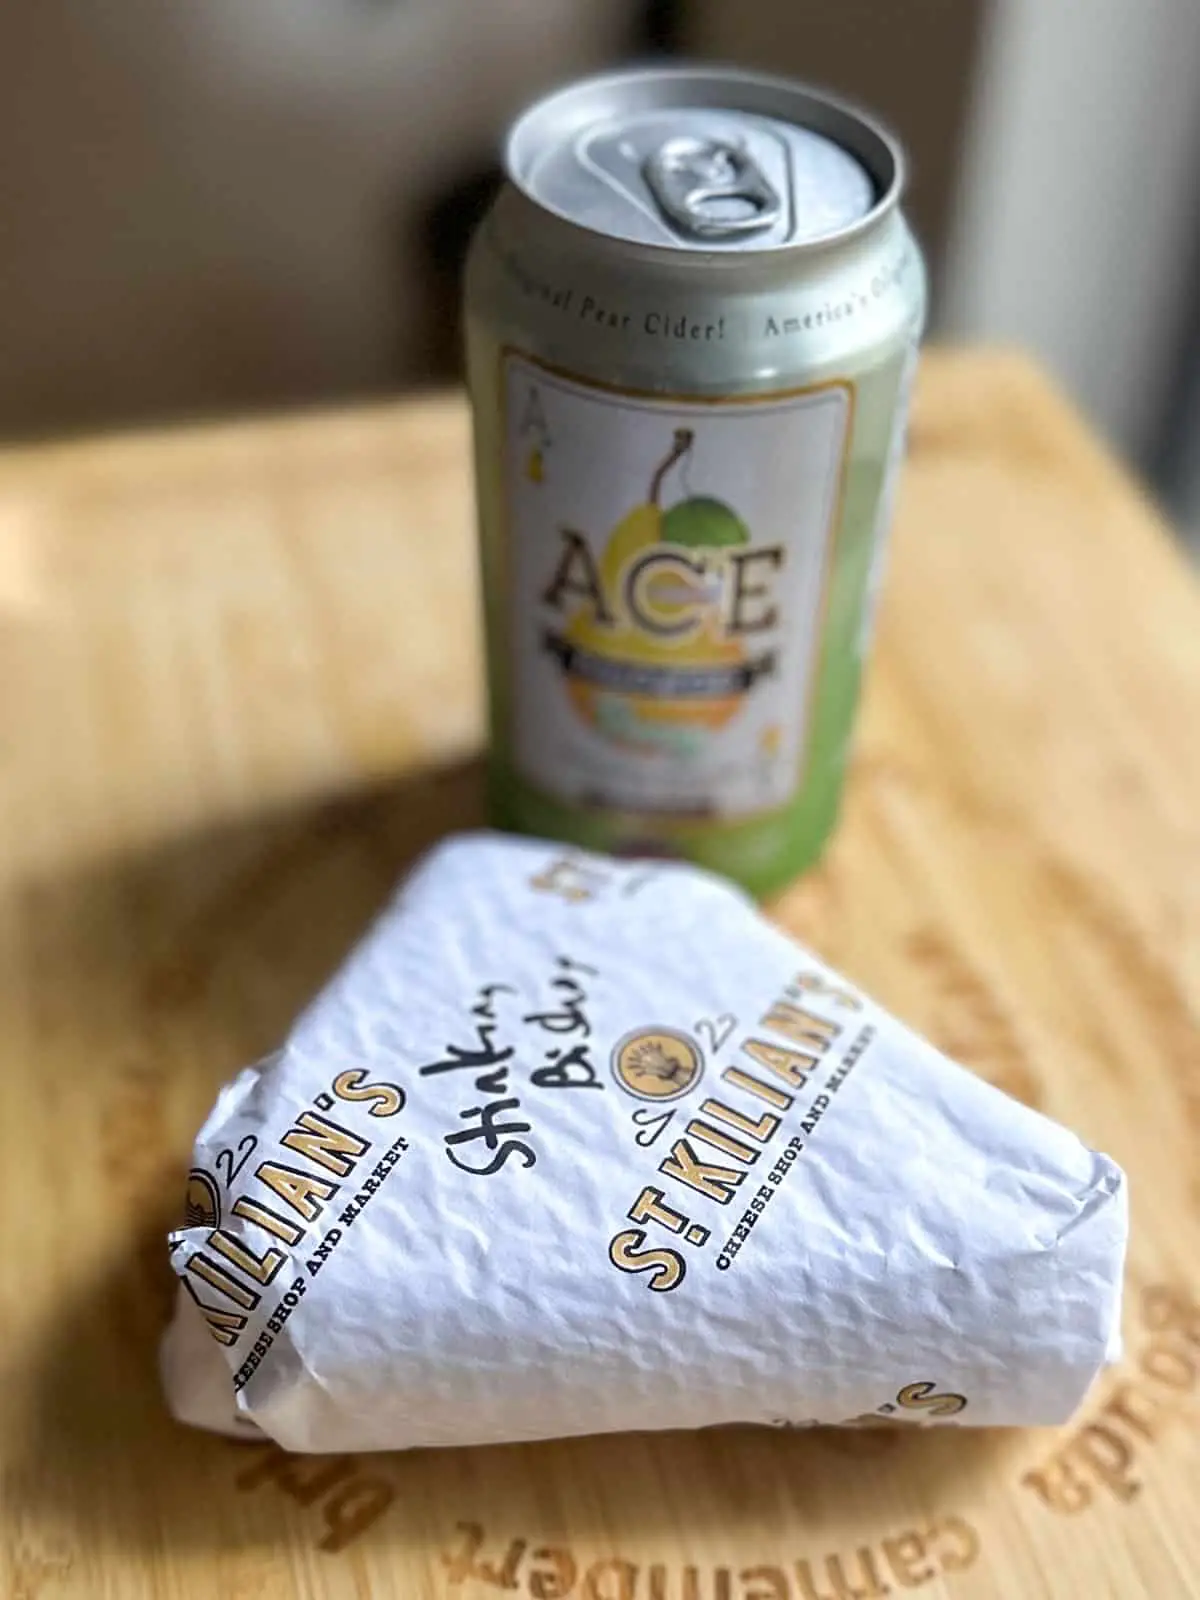 A can of Ace Perry Cider and a wrapped piece of Stinking Bishop cheese from St. Kilian's Cheese Shop.